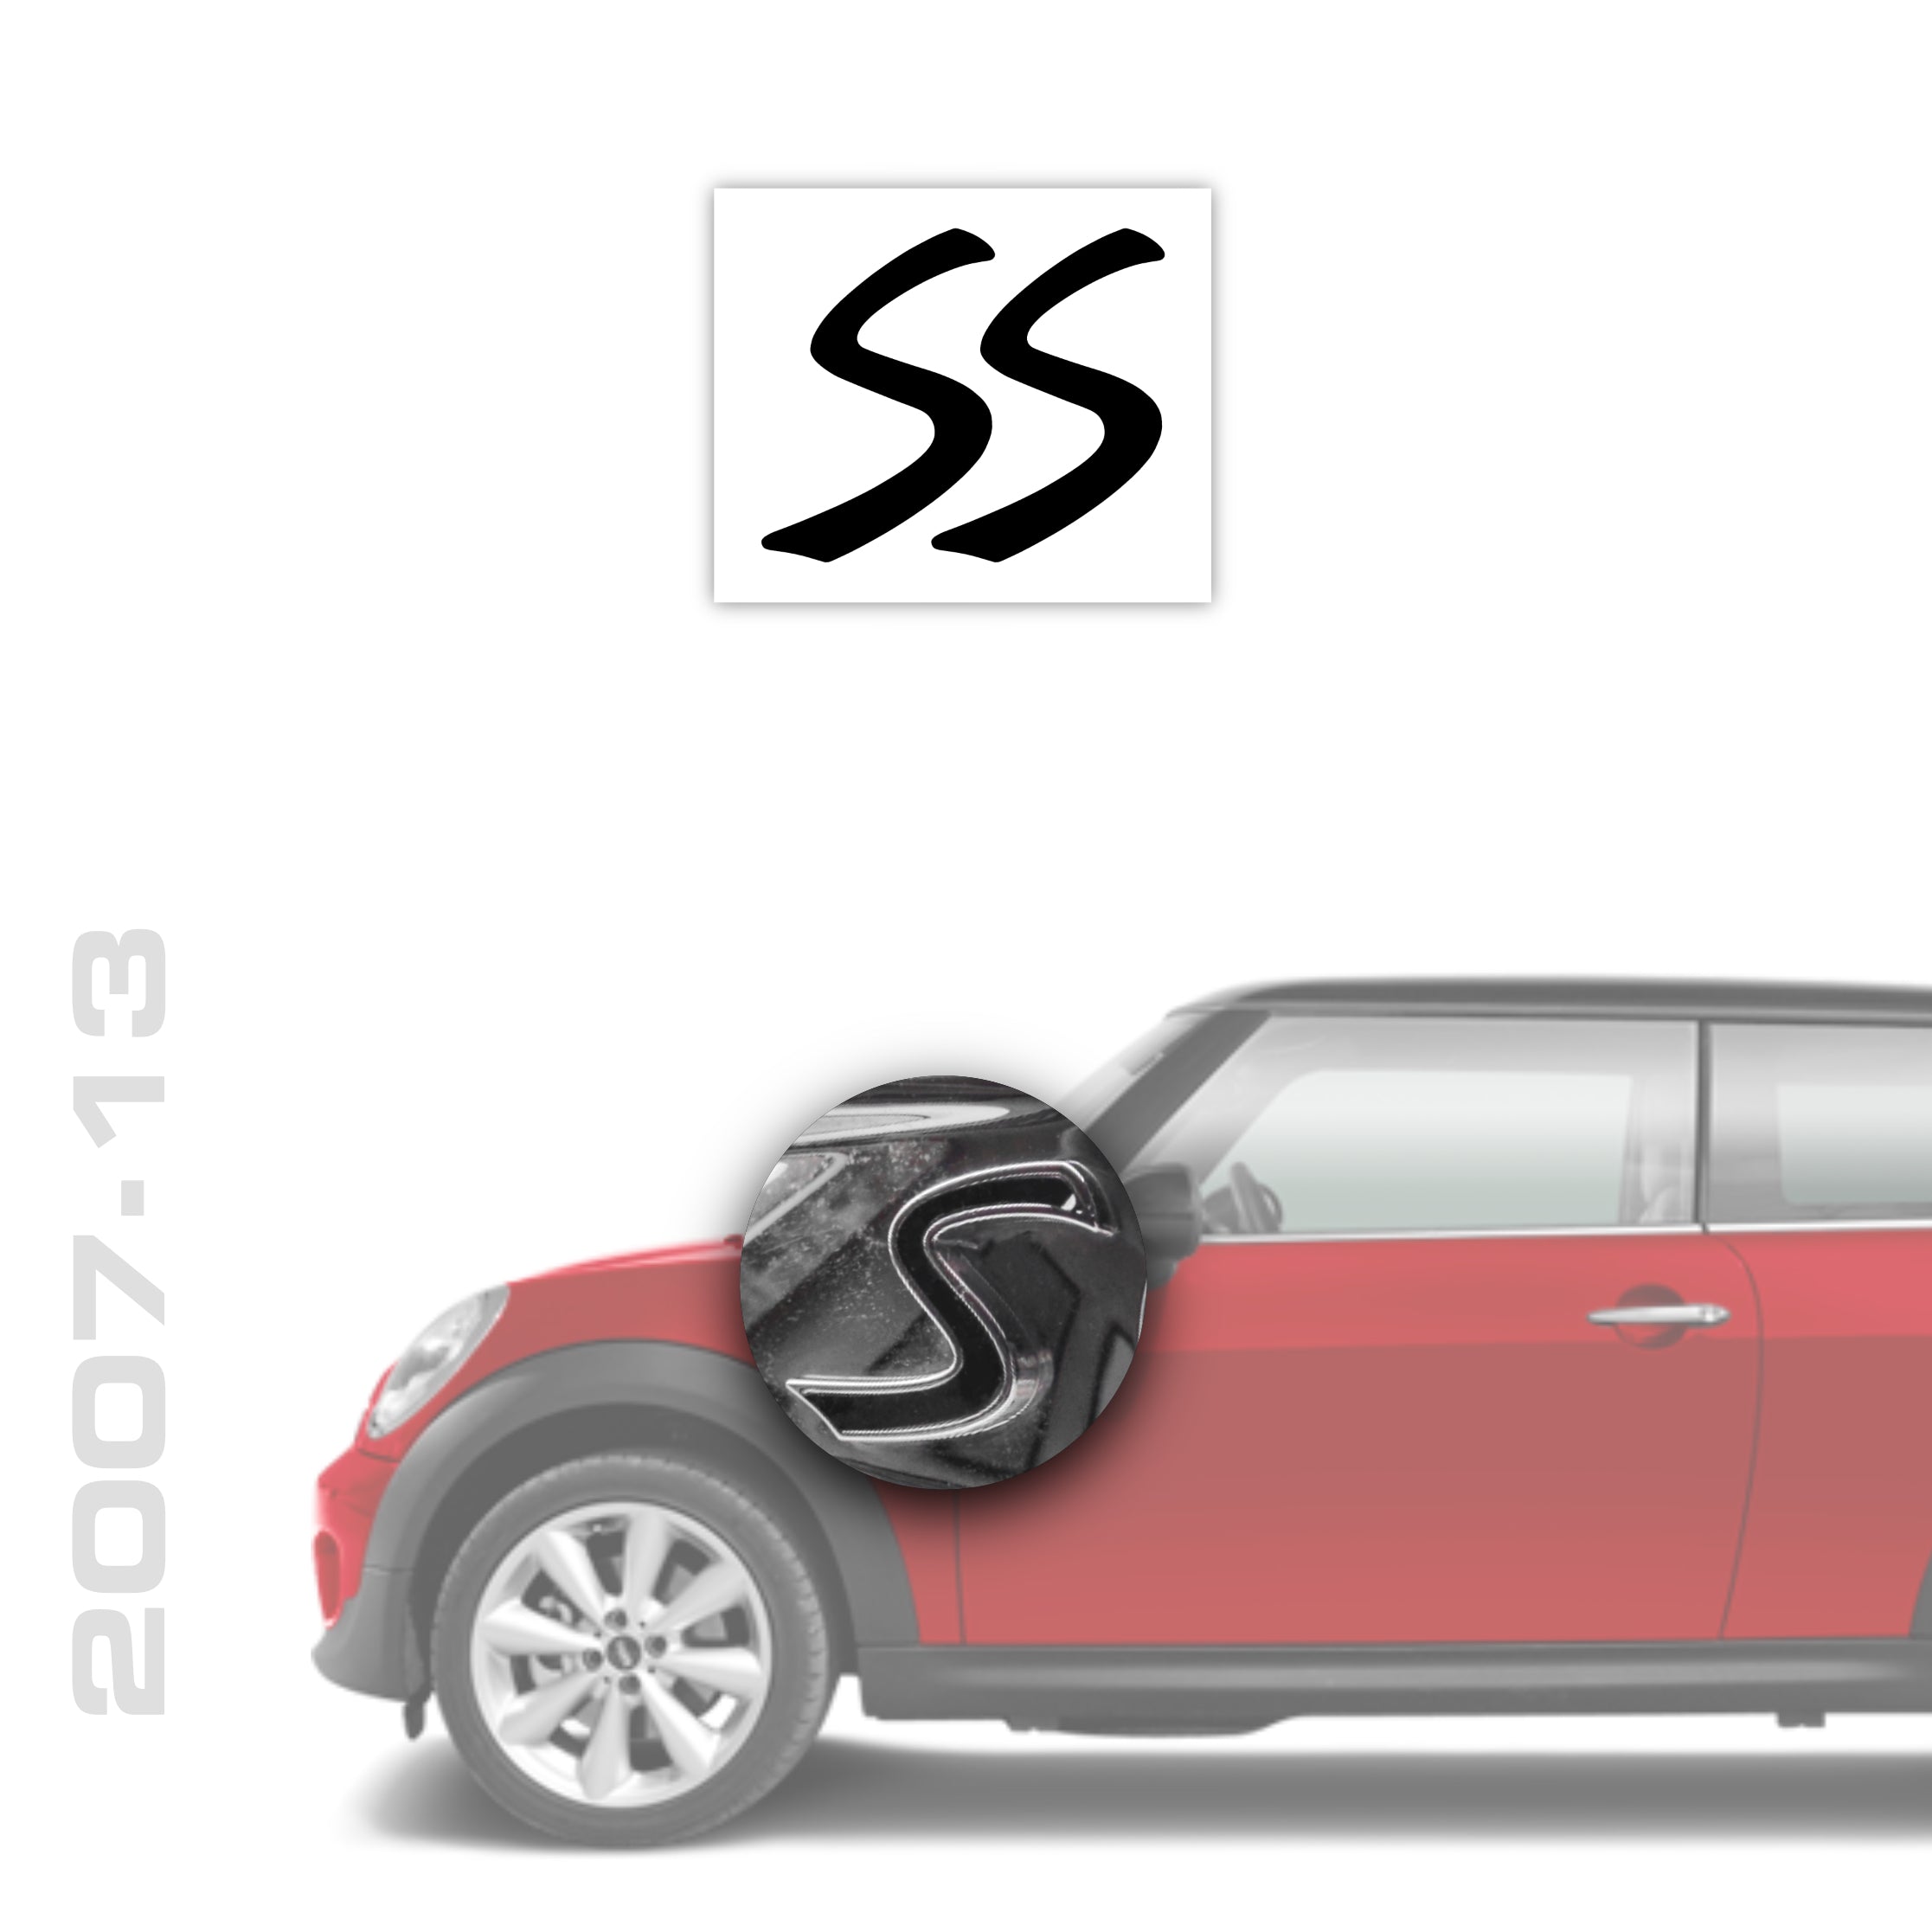 MINI R-Series Generation 2 Cooper S Side Accent Decal / Sticker